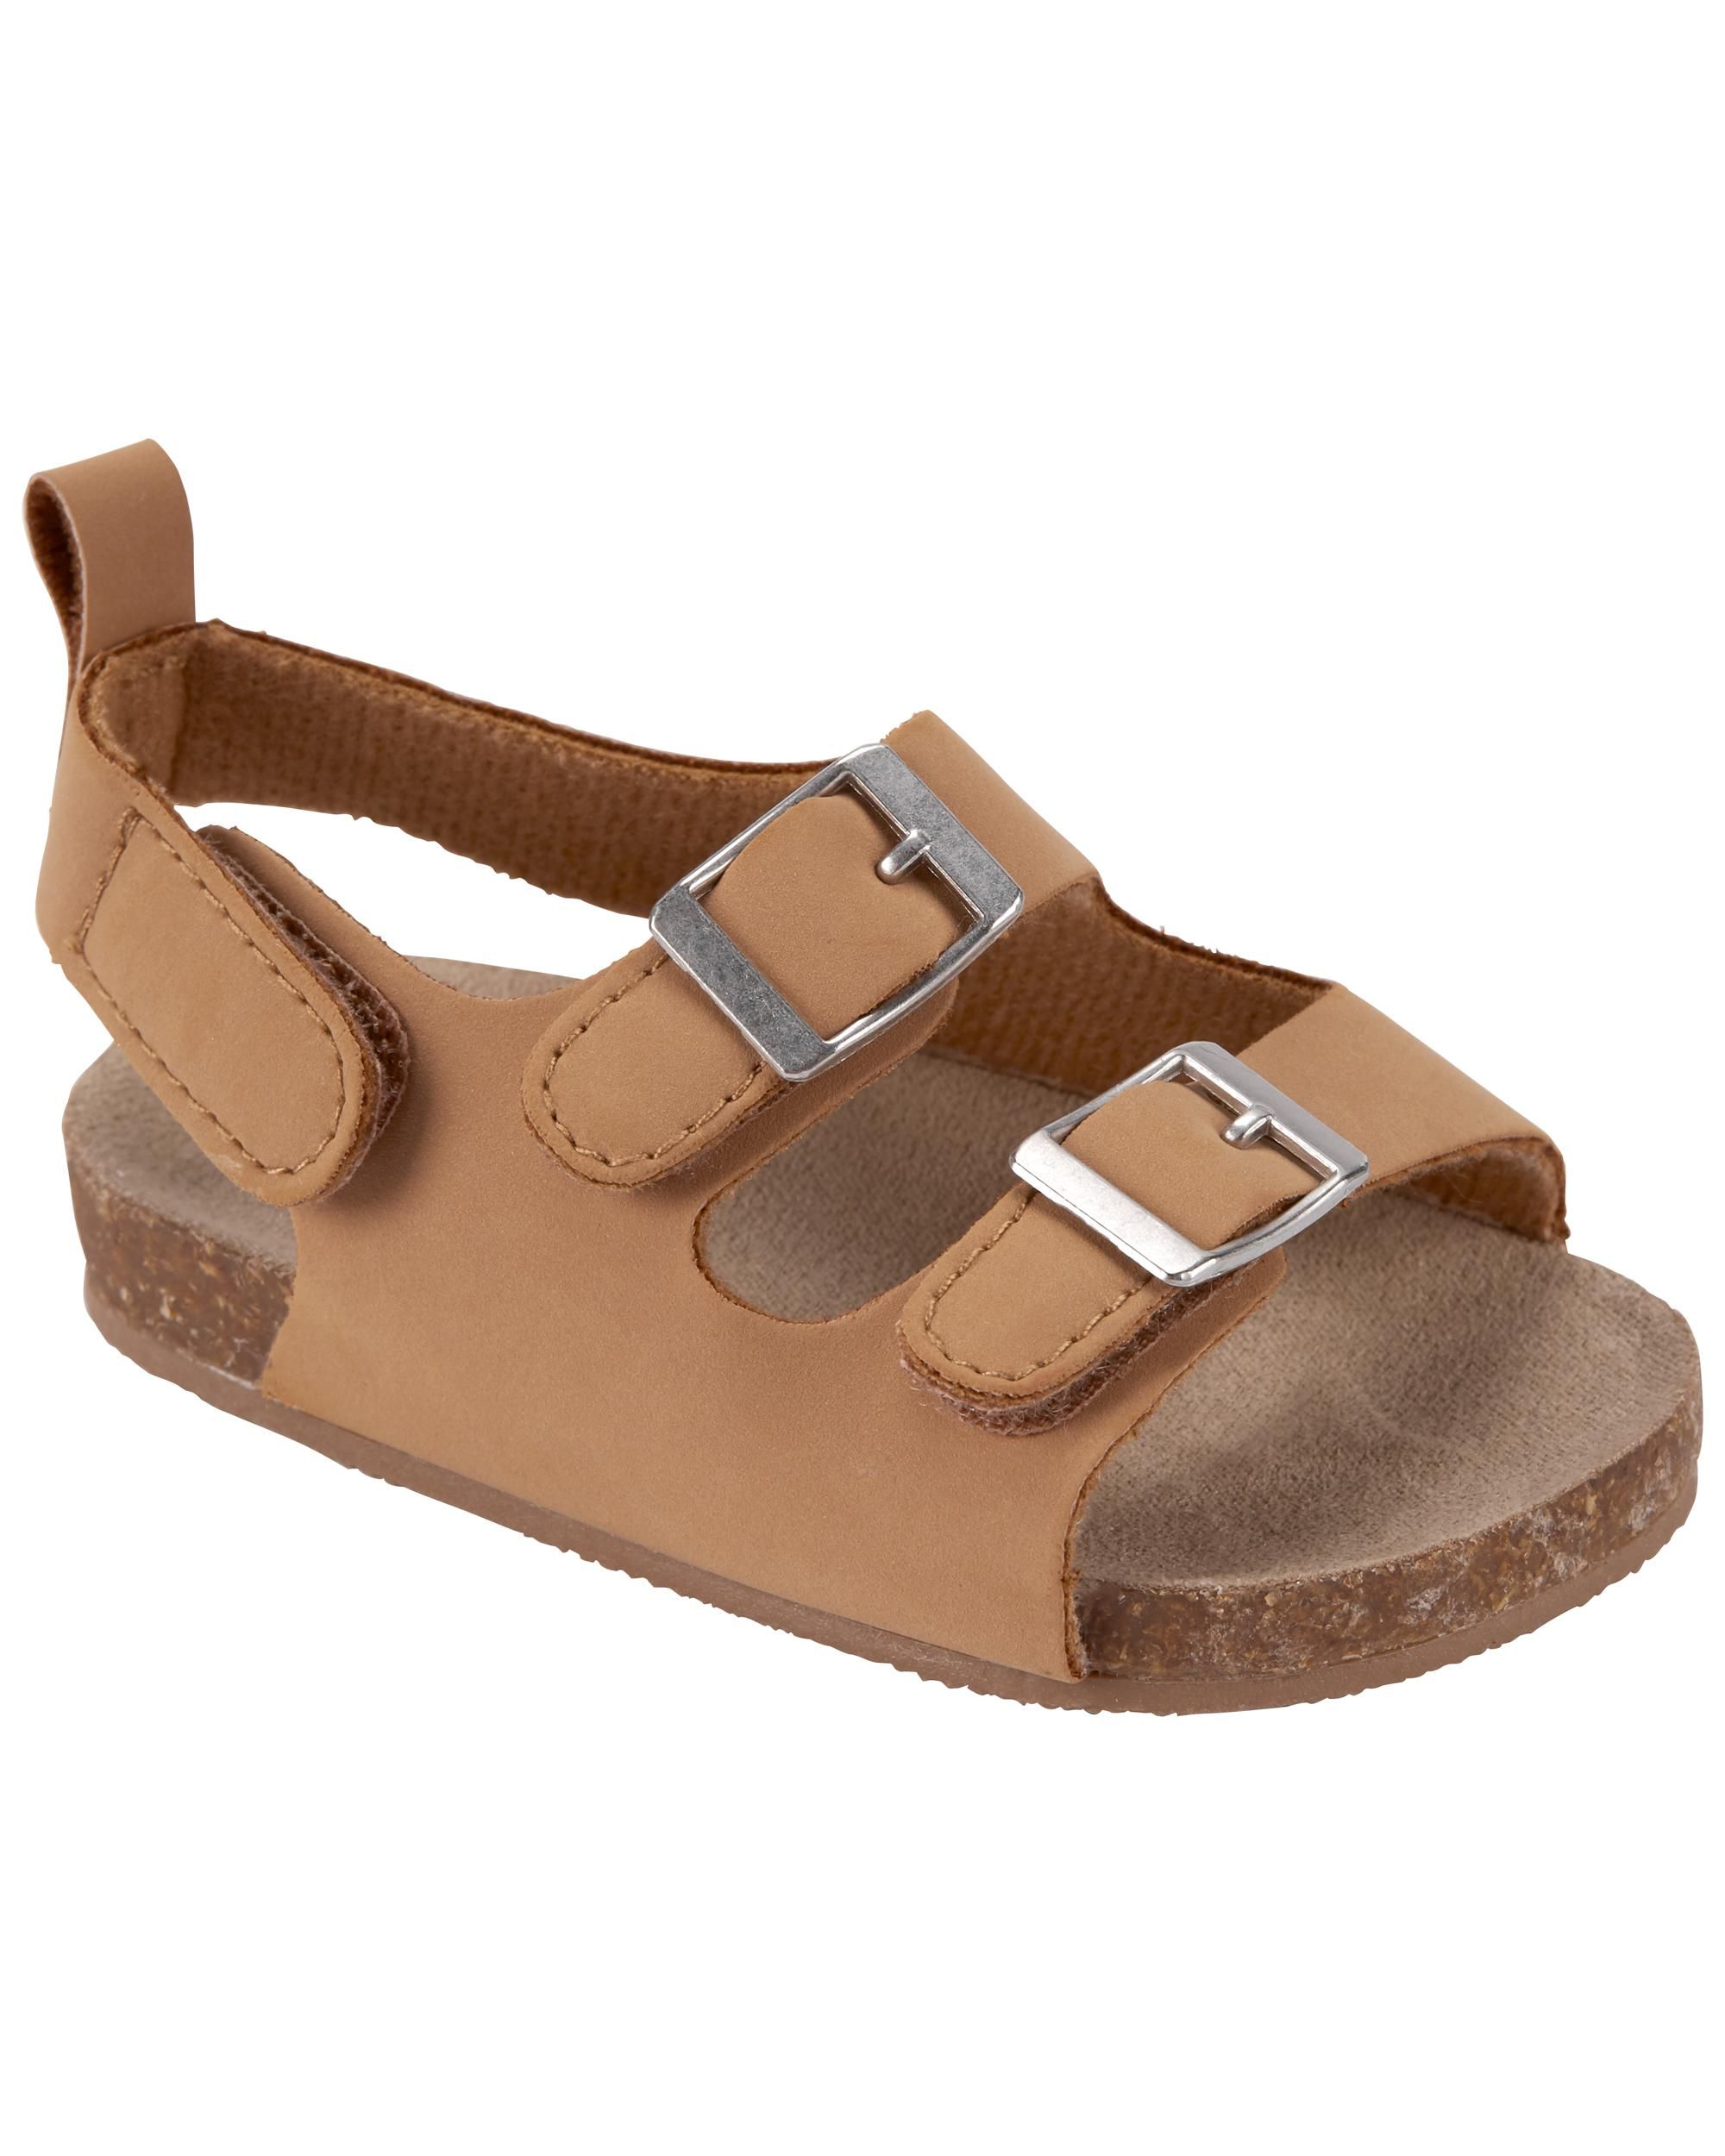 Brown Baby Cork Sandal Baby Shoes | carters.com | Carter's